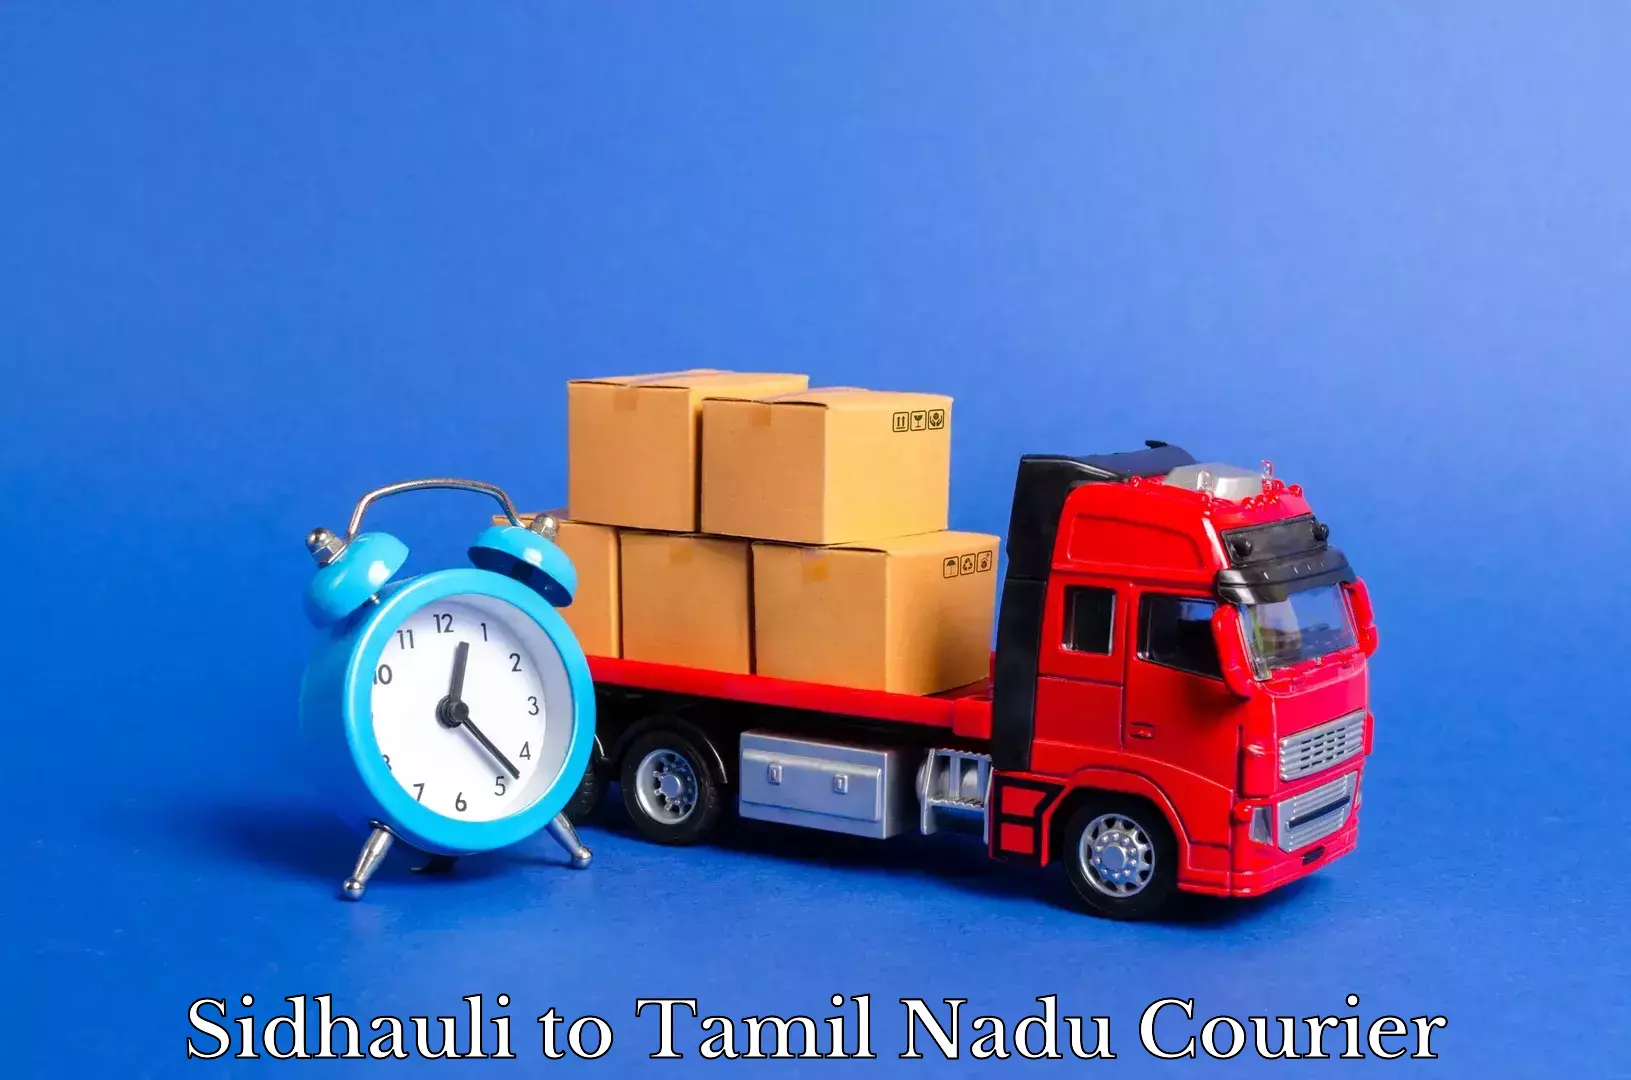 Affordable furniture movers Sidhauli to Meenakshi Academy of Higher Education and Research Chennai